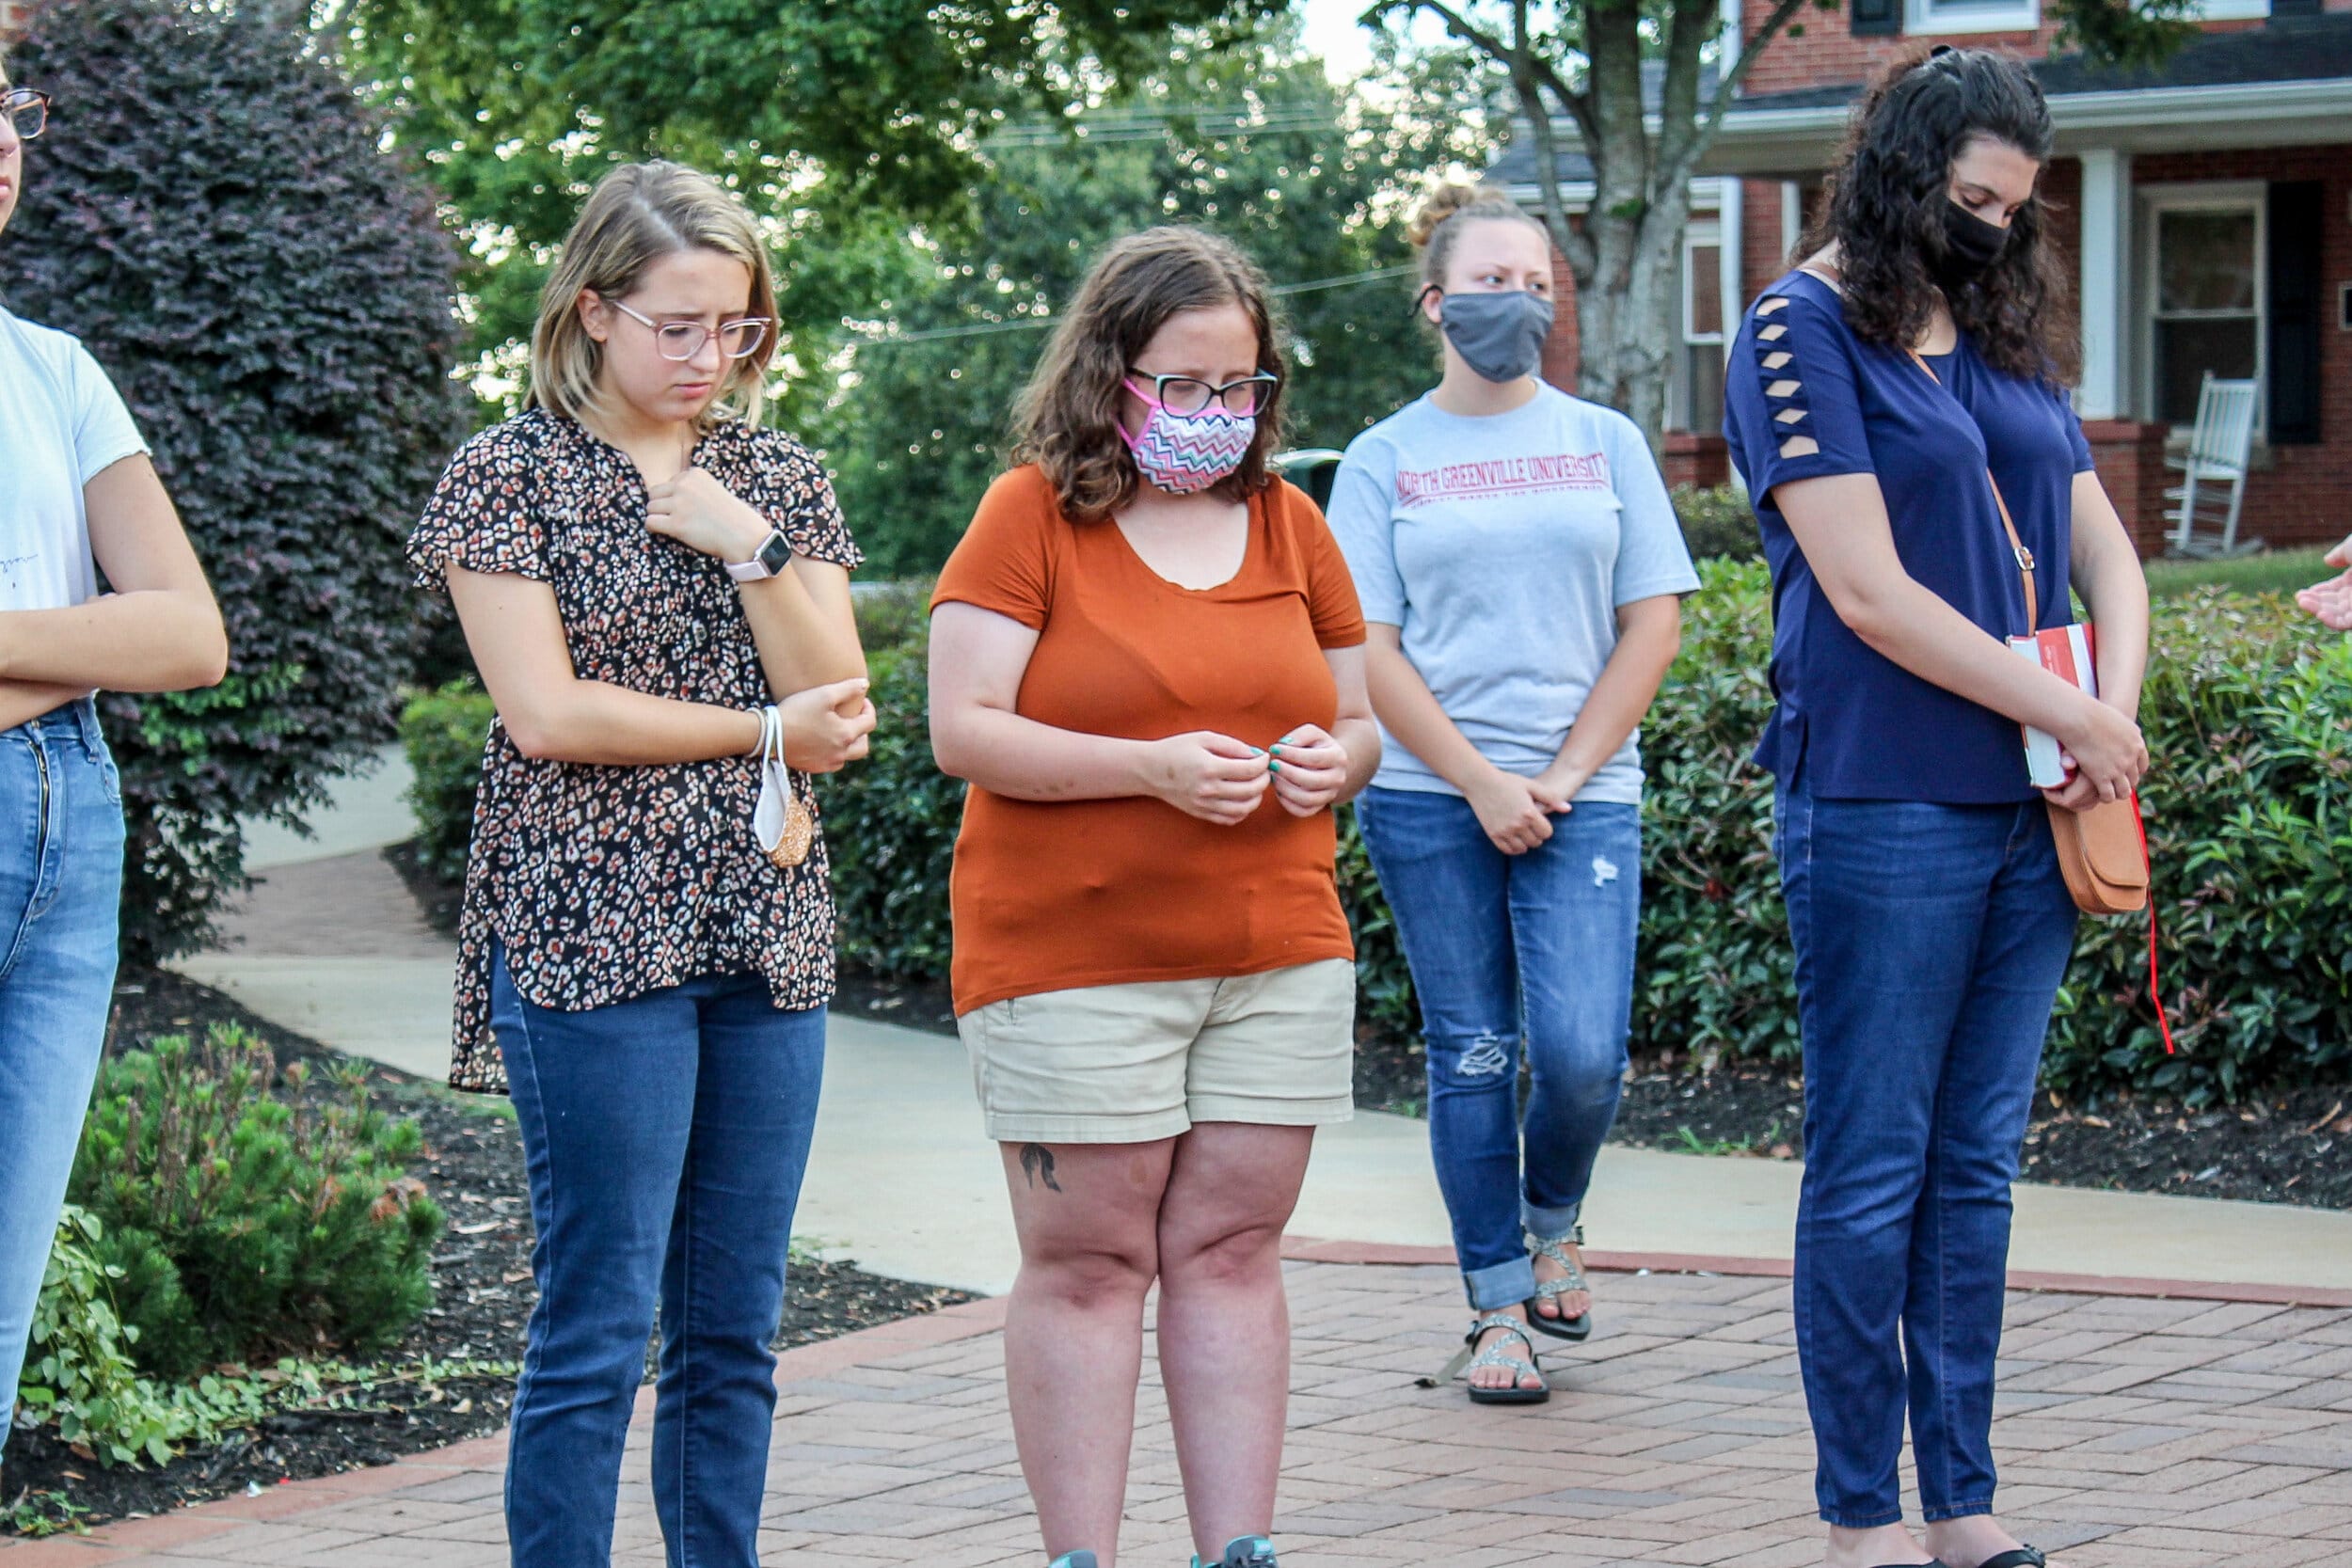 A group of girls bowed in prayer. BCM emphasizes community building, and through this event many are able to grow in their spiritual walks together.